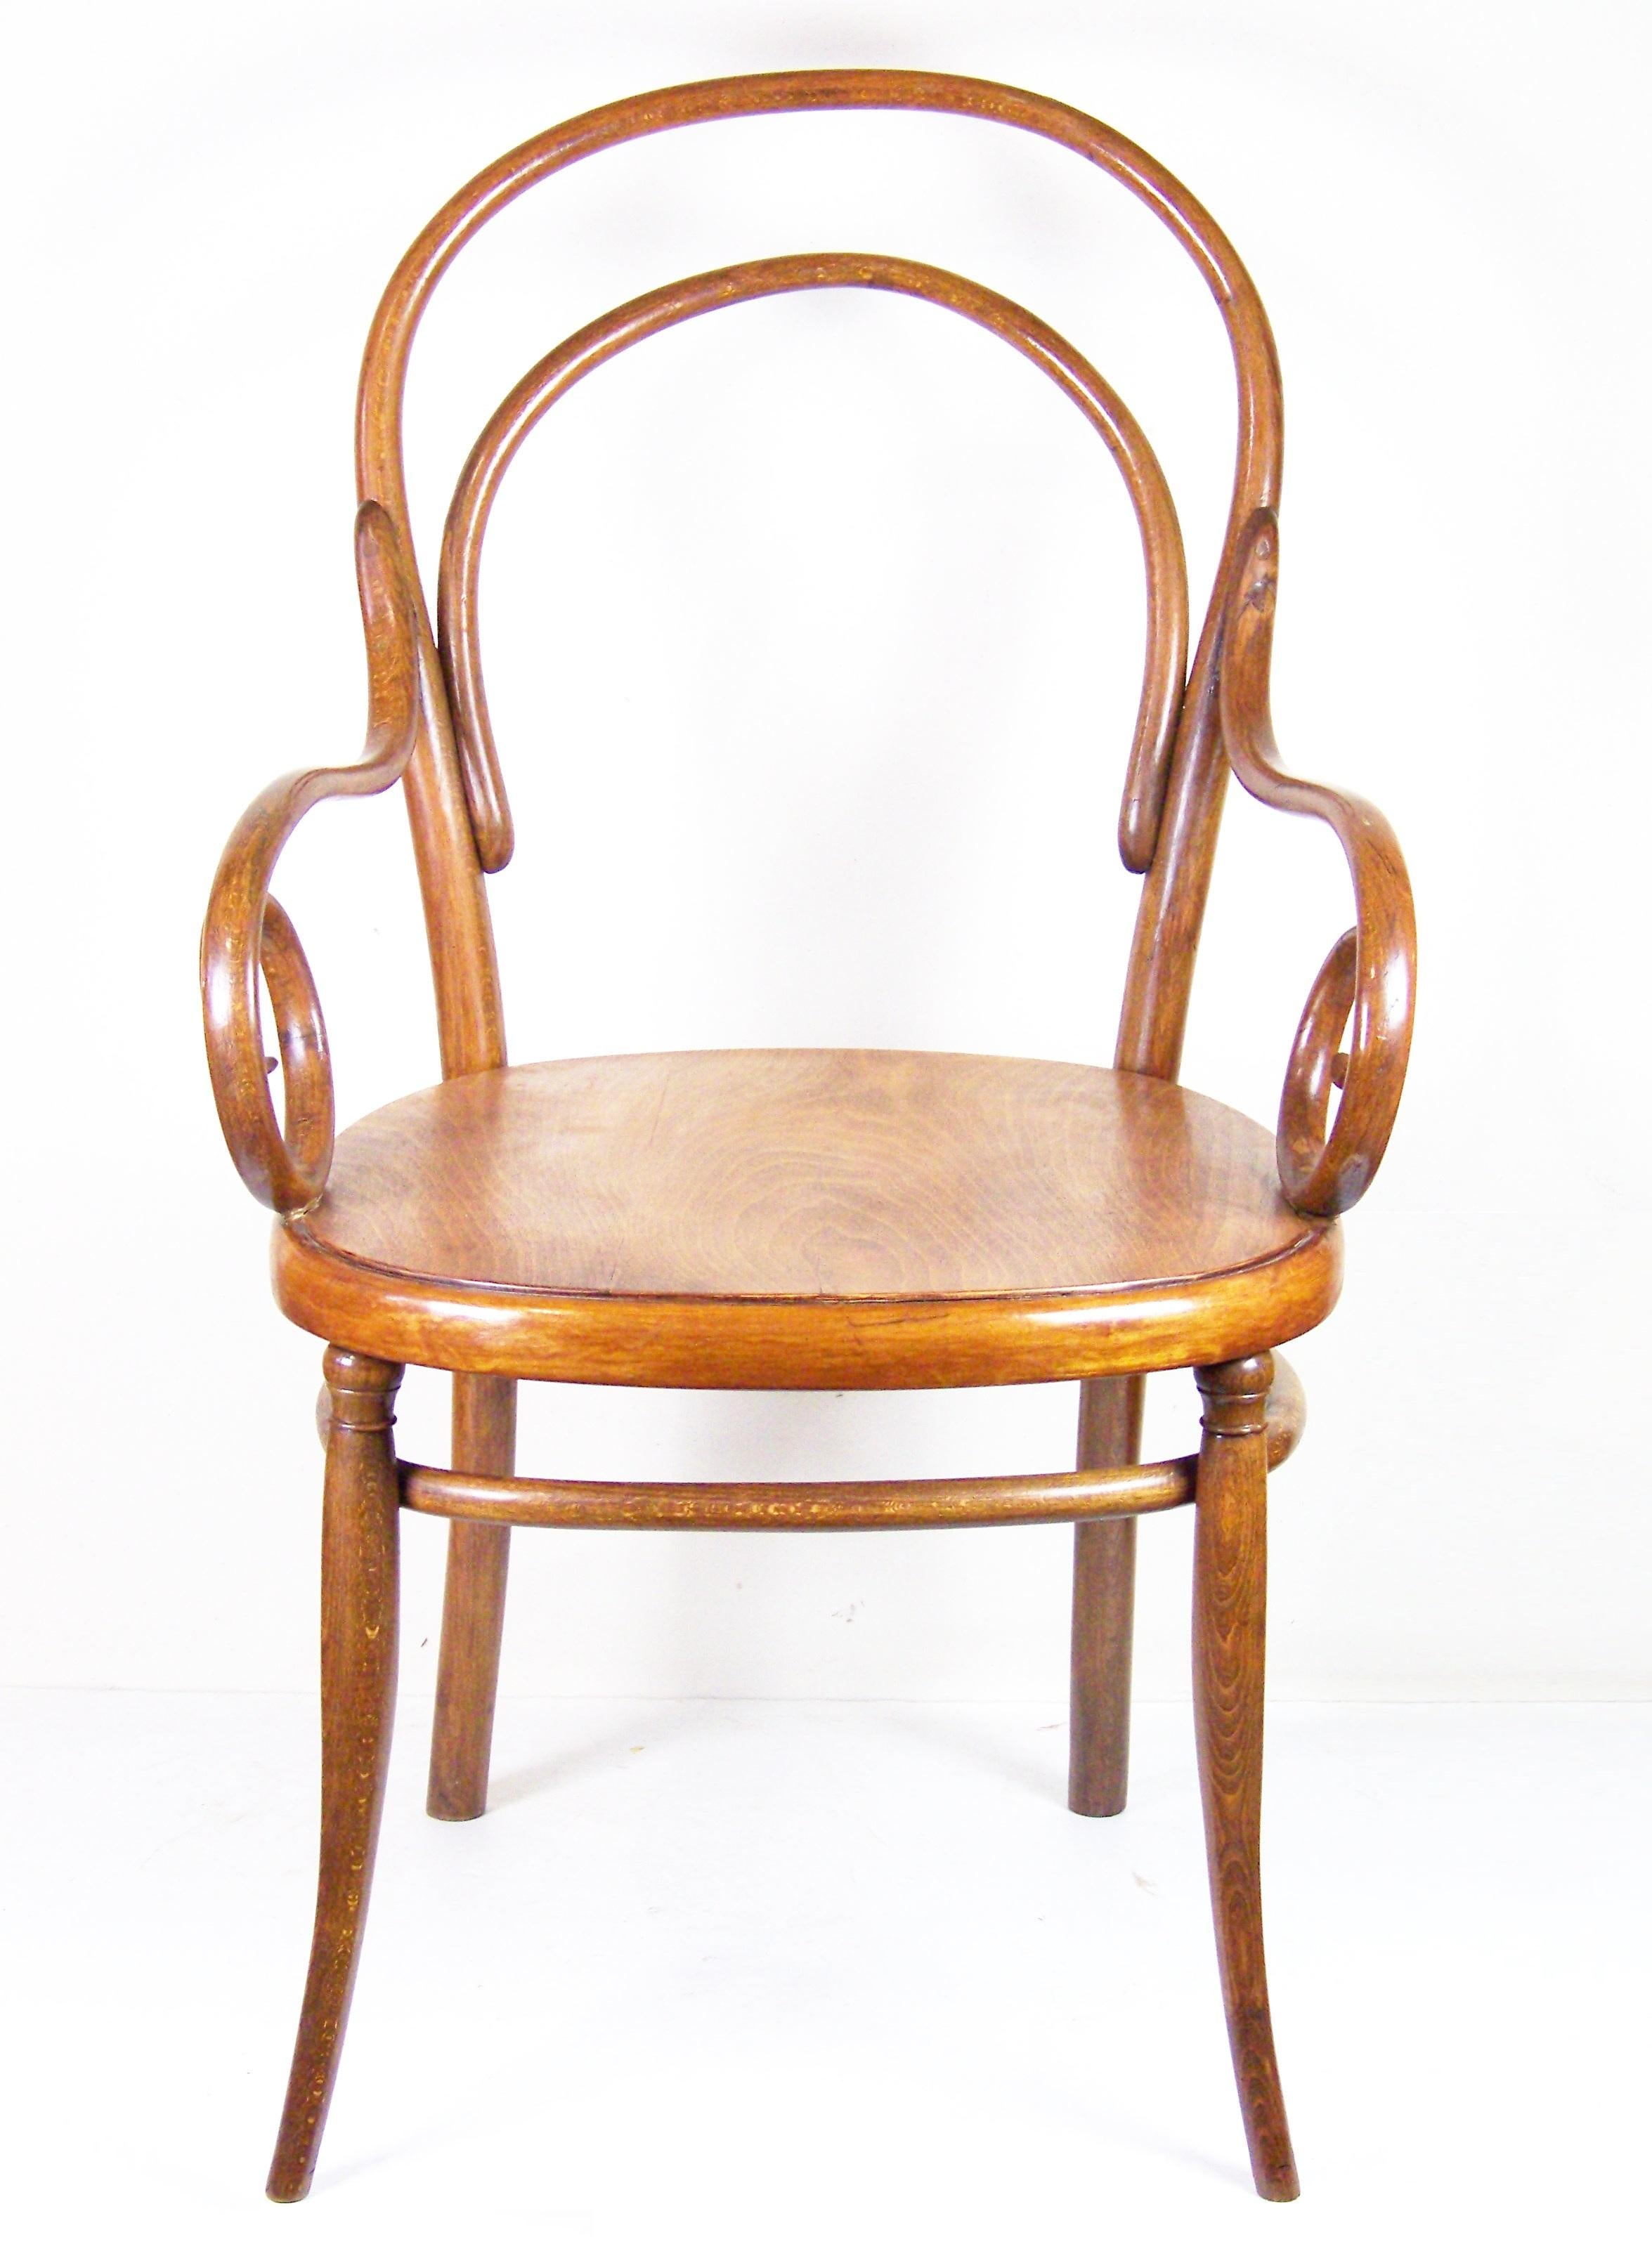 The shape of model no.8 was designed by Thonet, but this particular one was produced by a competing company (Fischel, Kohn?). This is a very old armchair from the beginnings of the production of bent furniture. These were always very subtle and